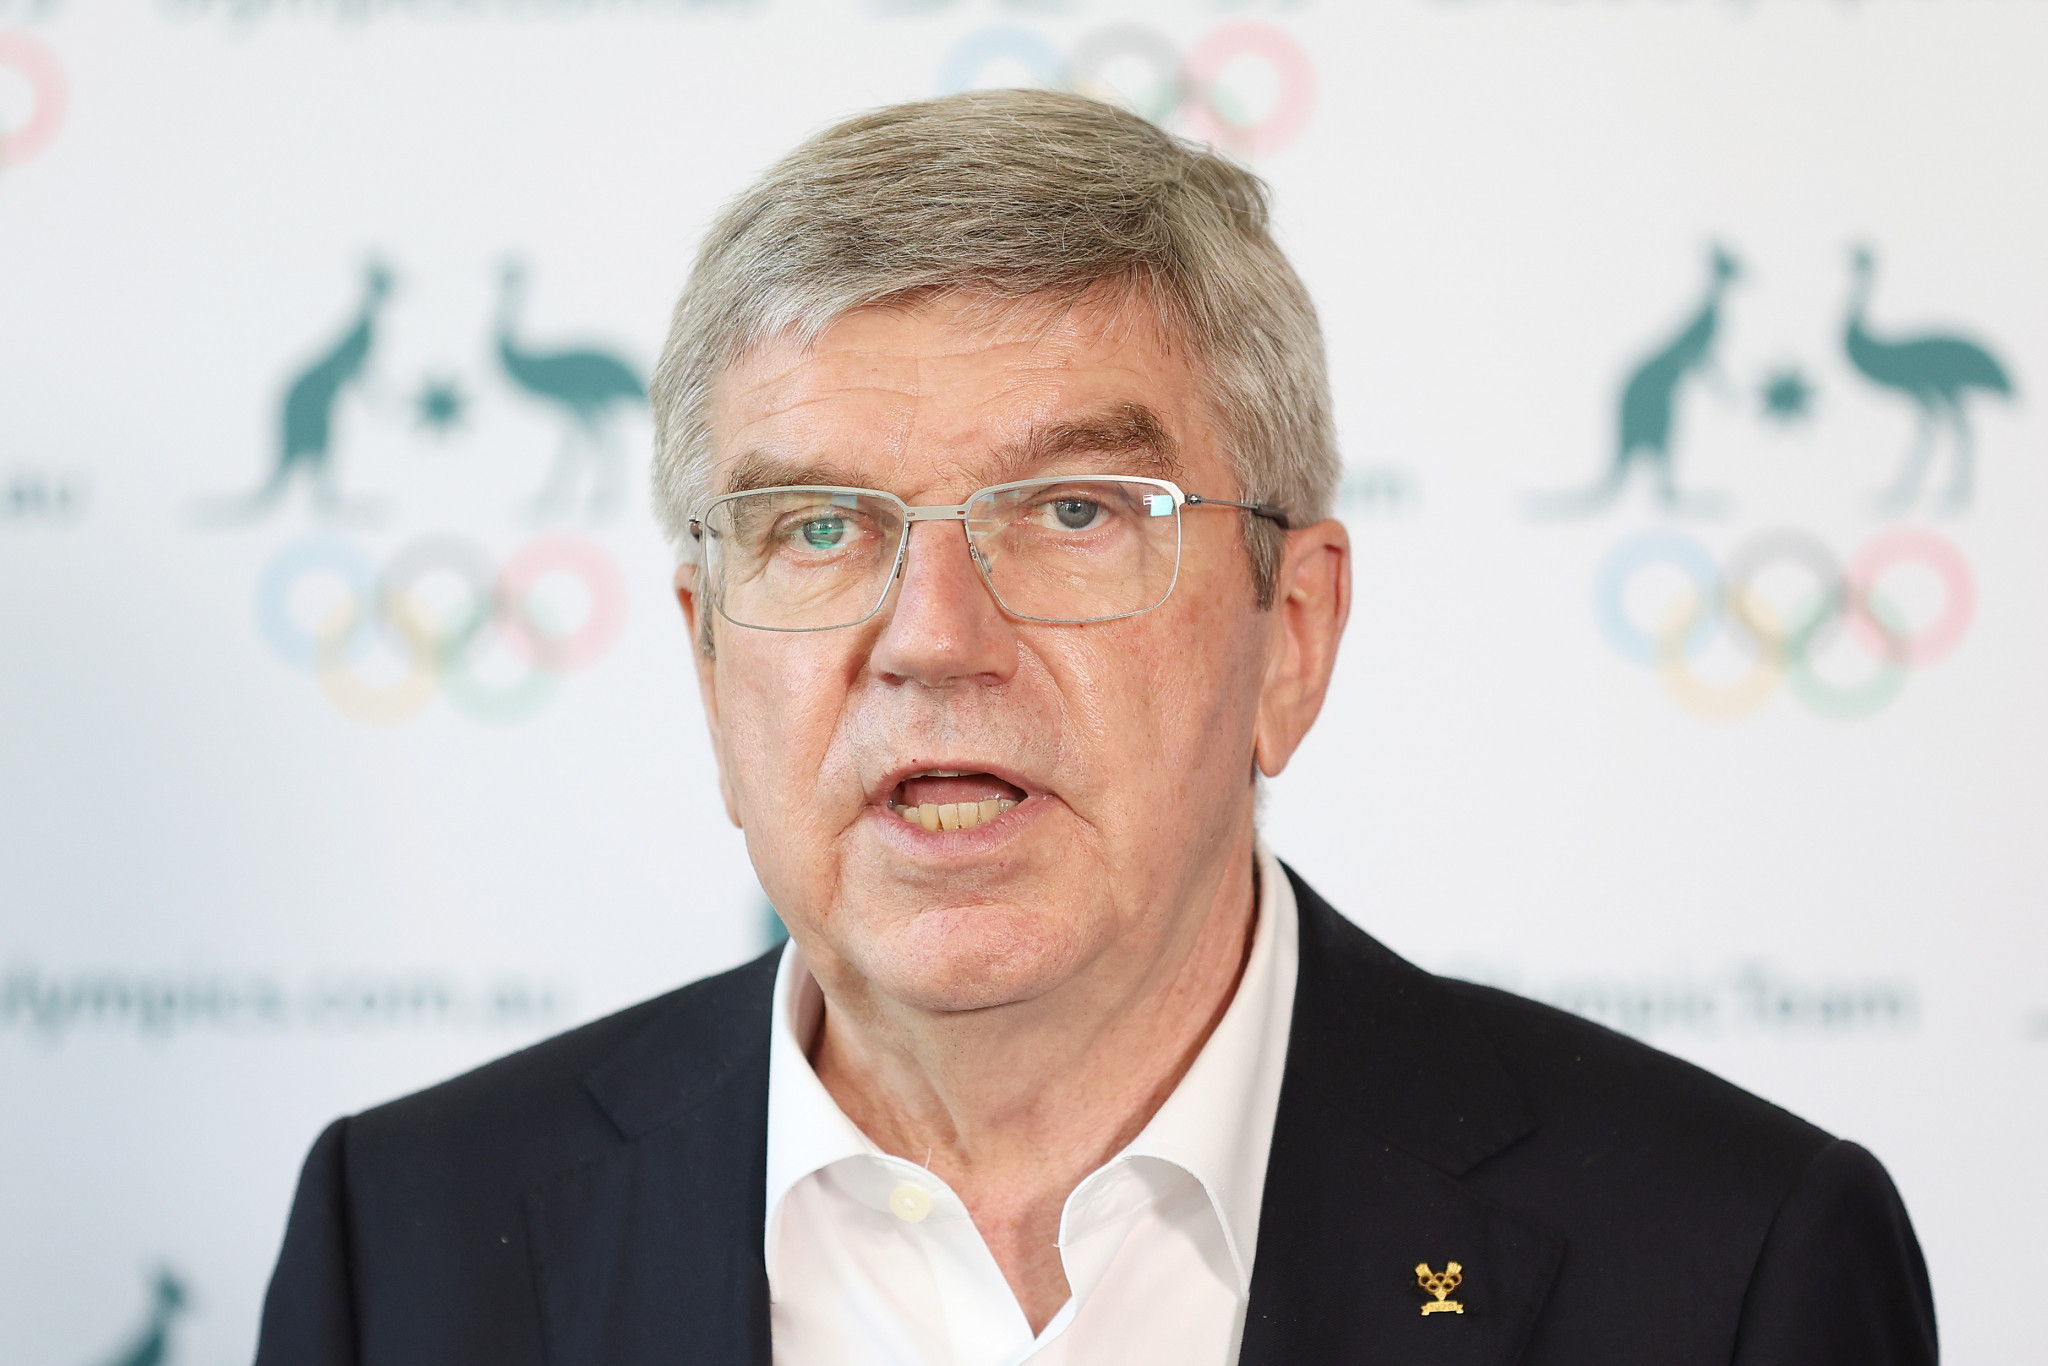 International Olympic Committee President Thomas Bach said the new deal would ensure Australians get unparalleled coverage of forthcoming Olympic Games ©Getty Images